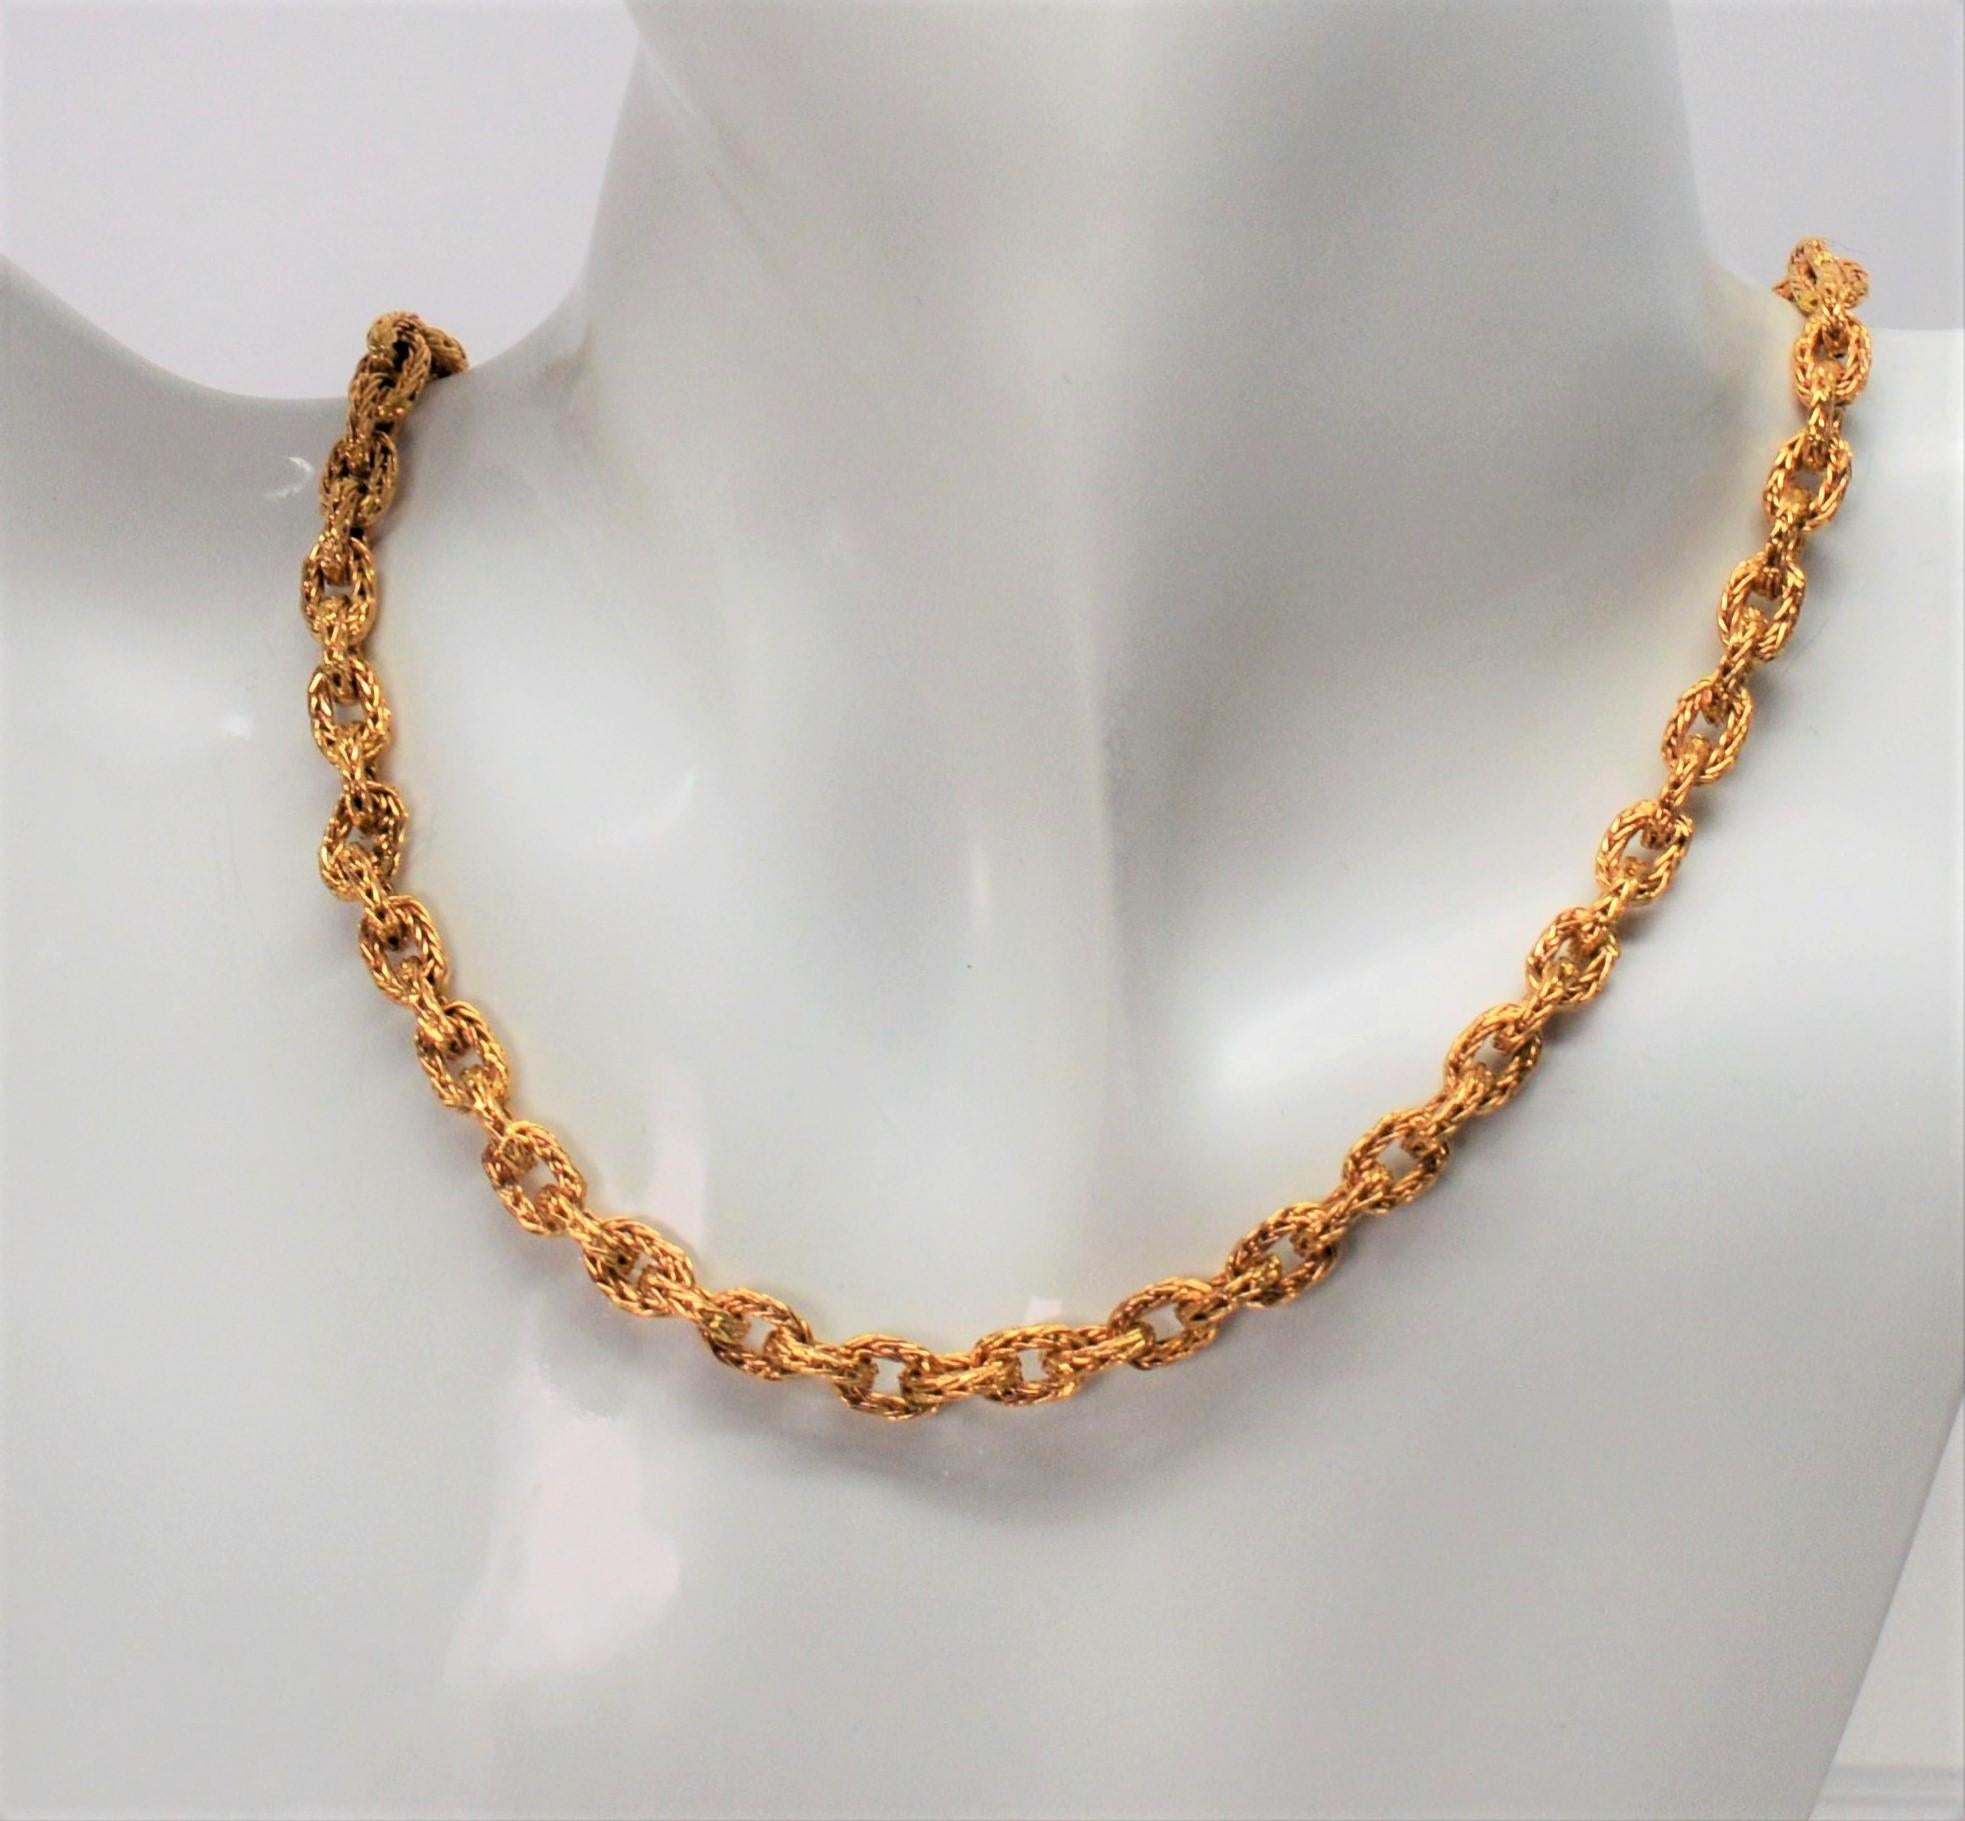 Quality Italian craftsmanship is displayed in this fine necklace of unique and individually hand woven oval wire links in bright eighteen karat  18K yellow gold.  It's rustic texture is the outstanding feature and creates interest along this sixteen